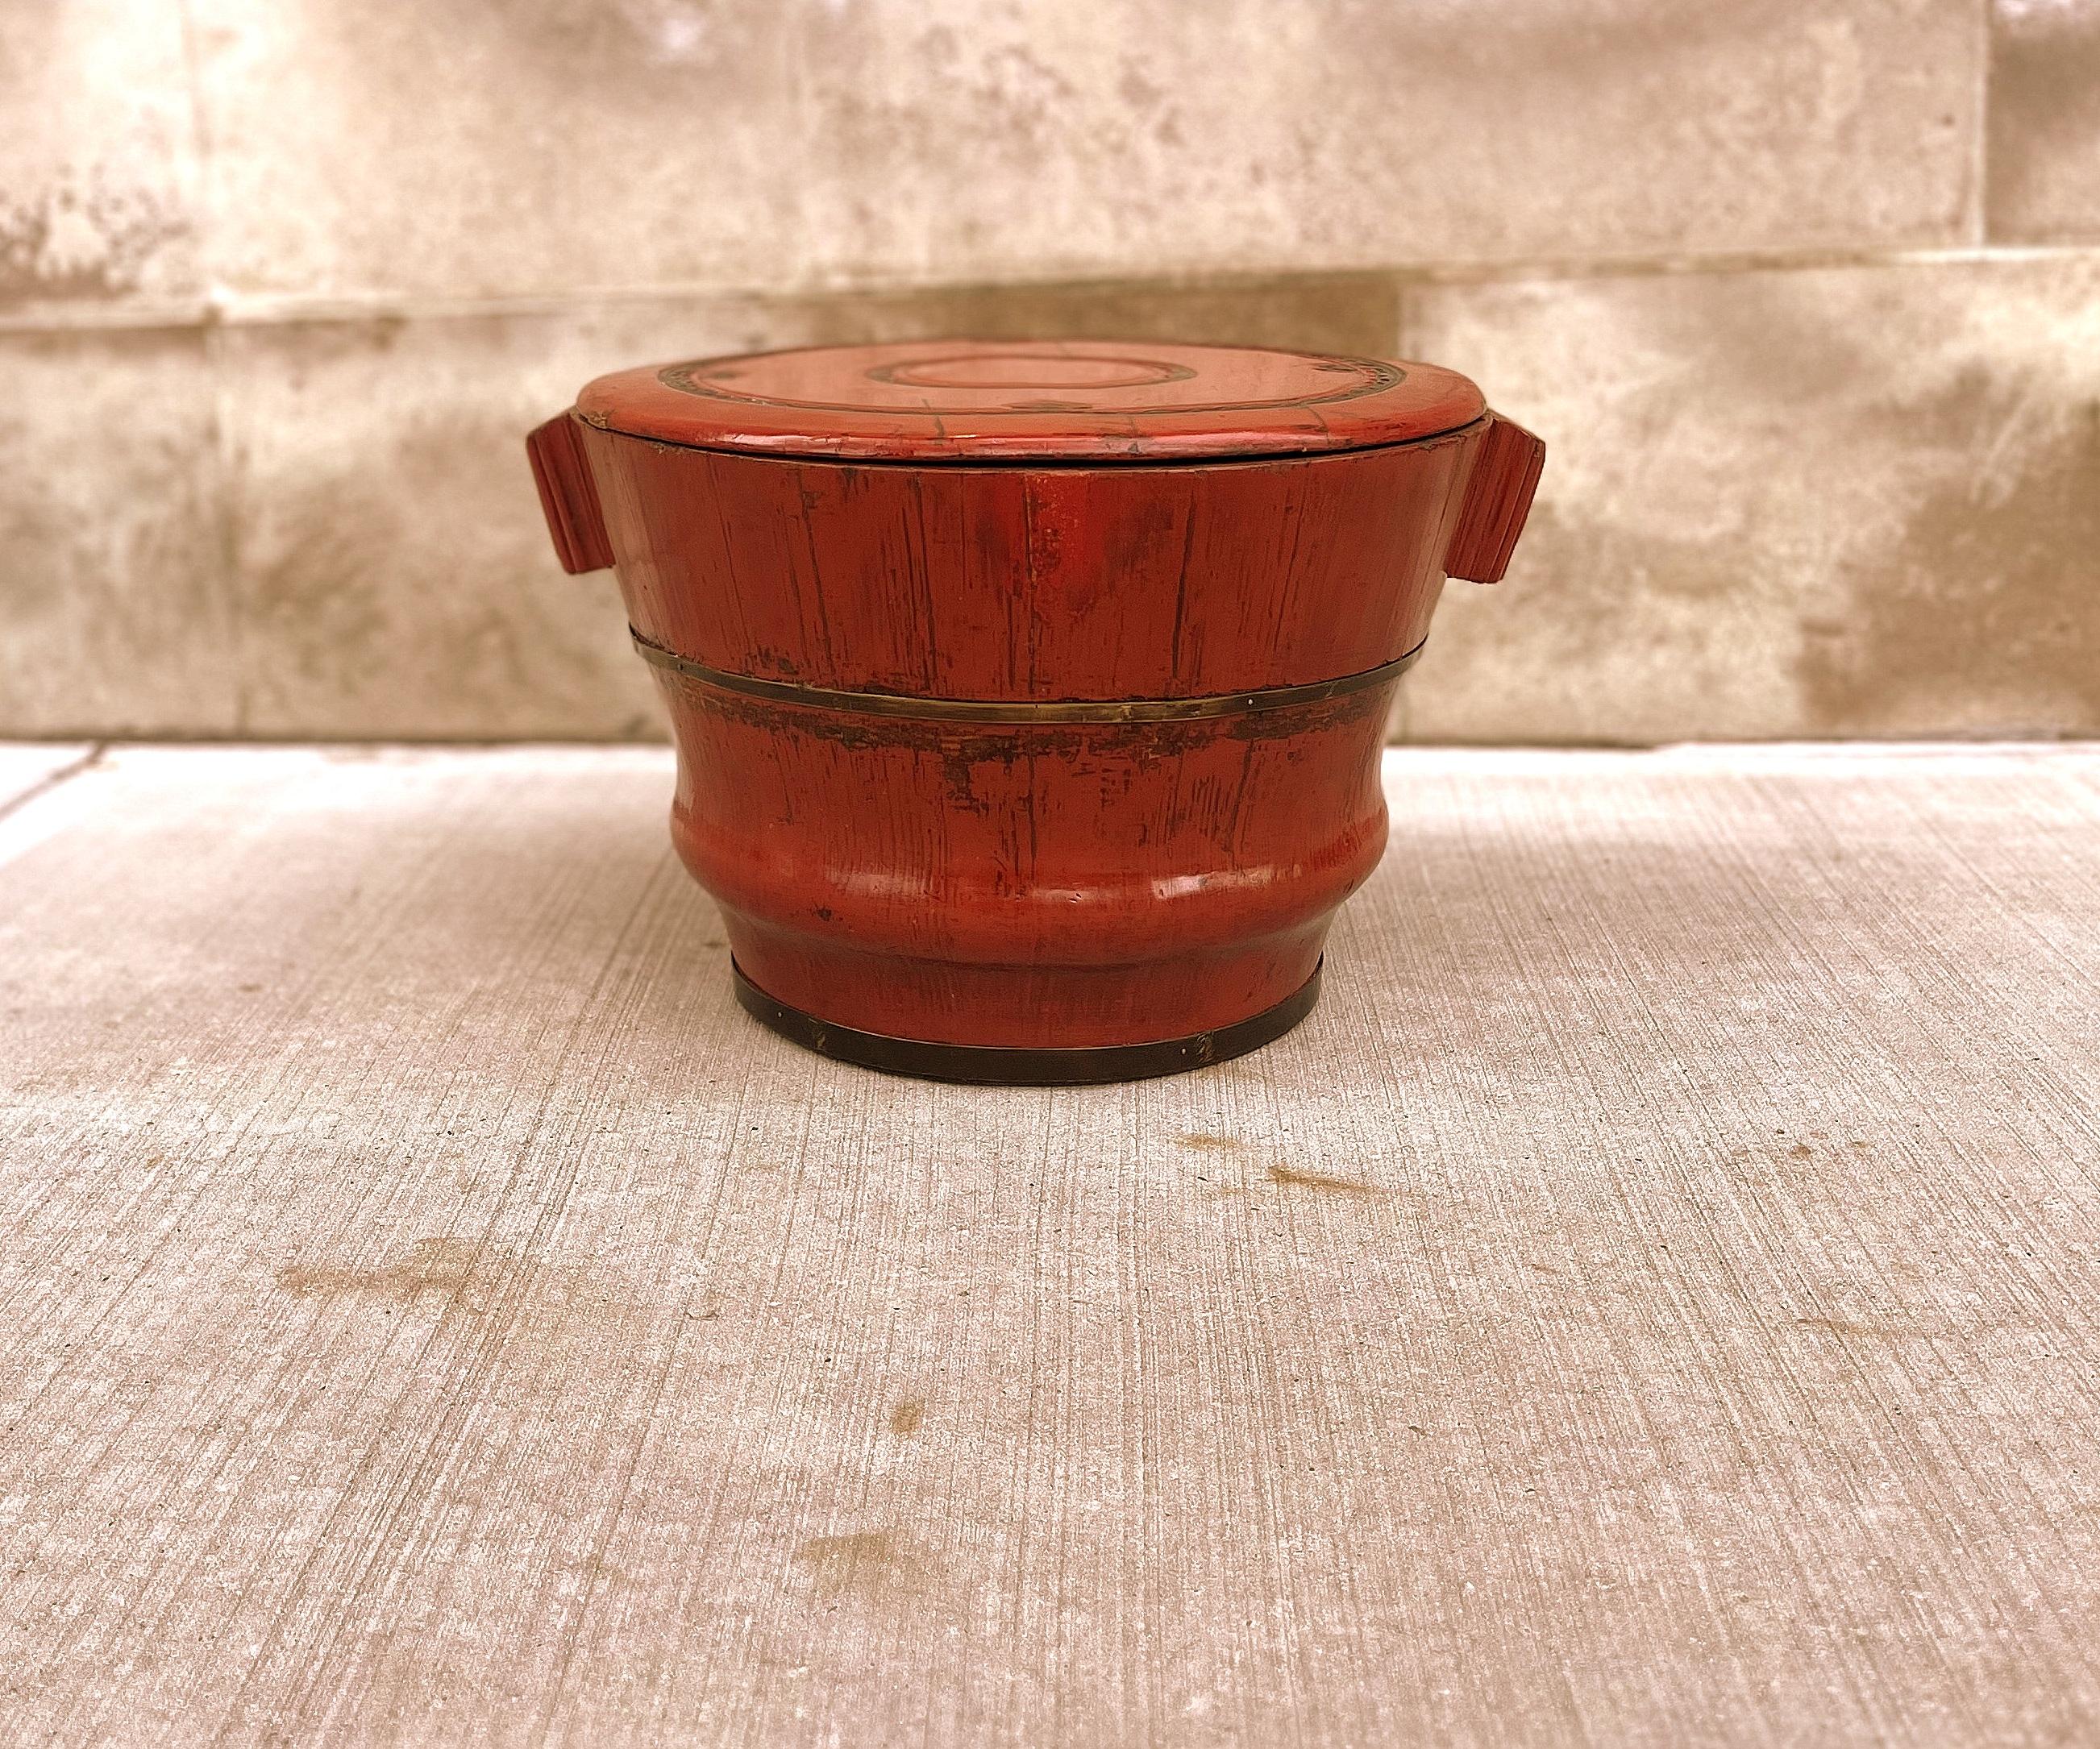 Antique red lacquer wood container was used to store rice or grains. The red lacquer container with two side short handles round shape, constructed with elm wood and body with metal bracket.  Top cover lid with relief carvings, well craftsmanship.